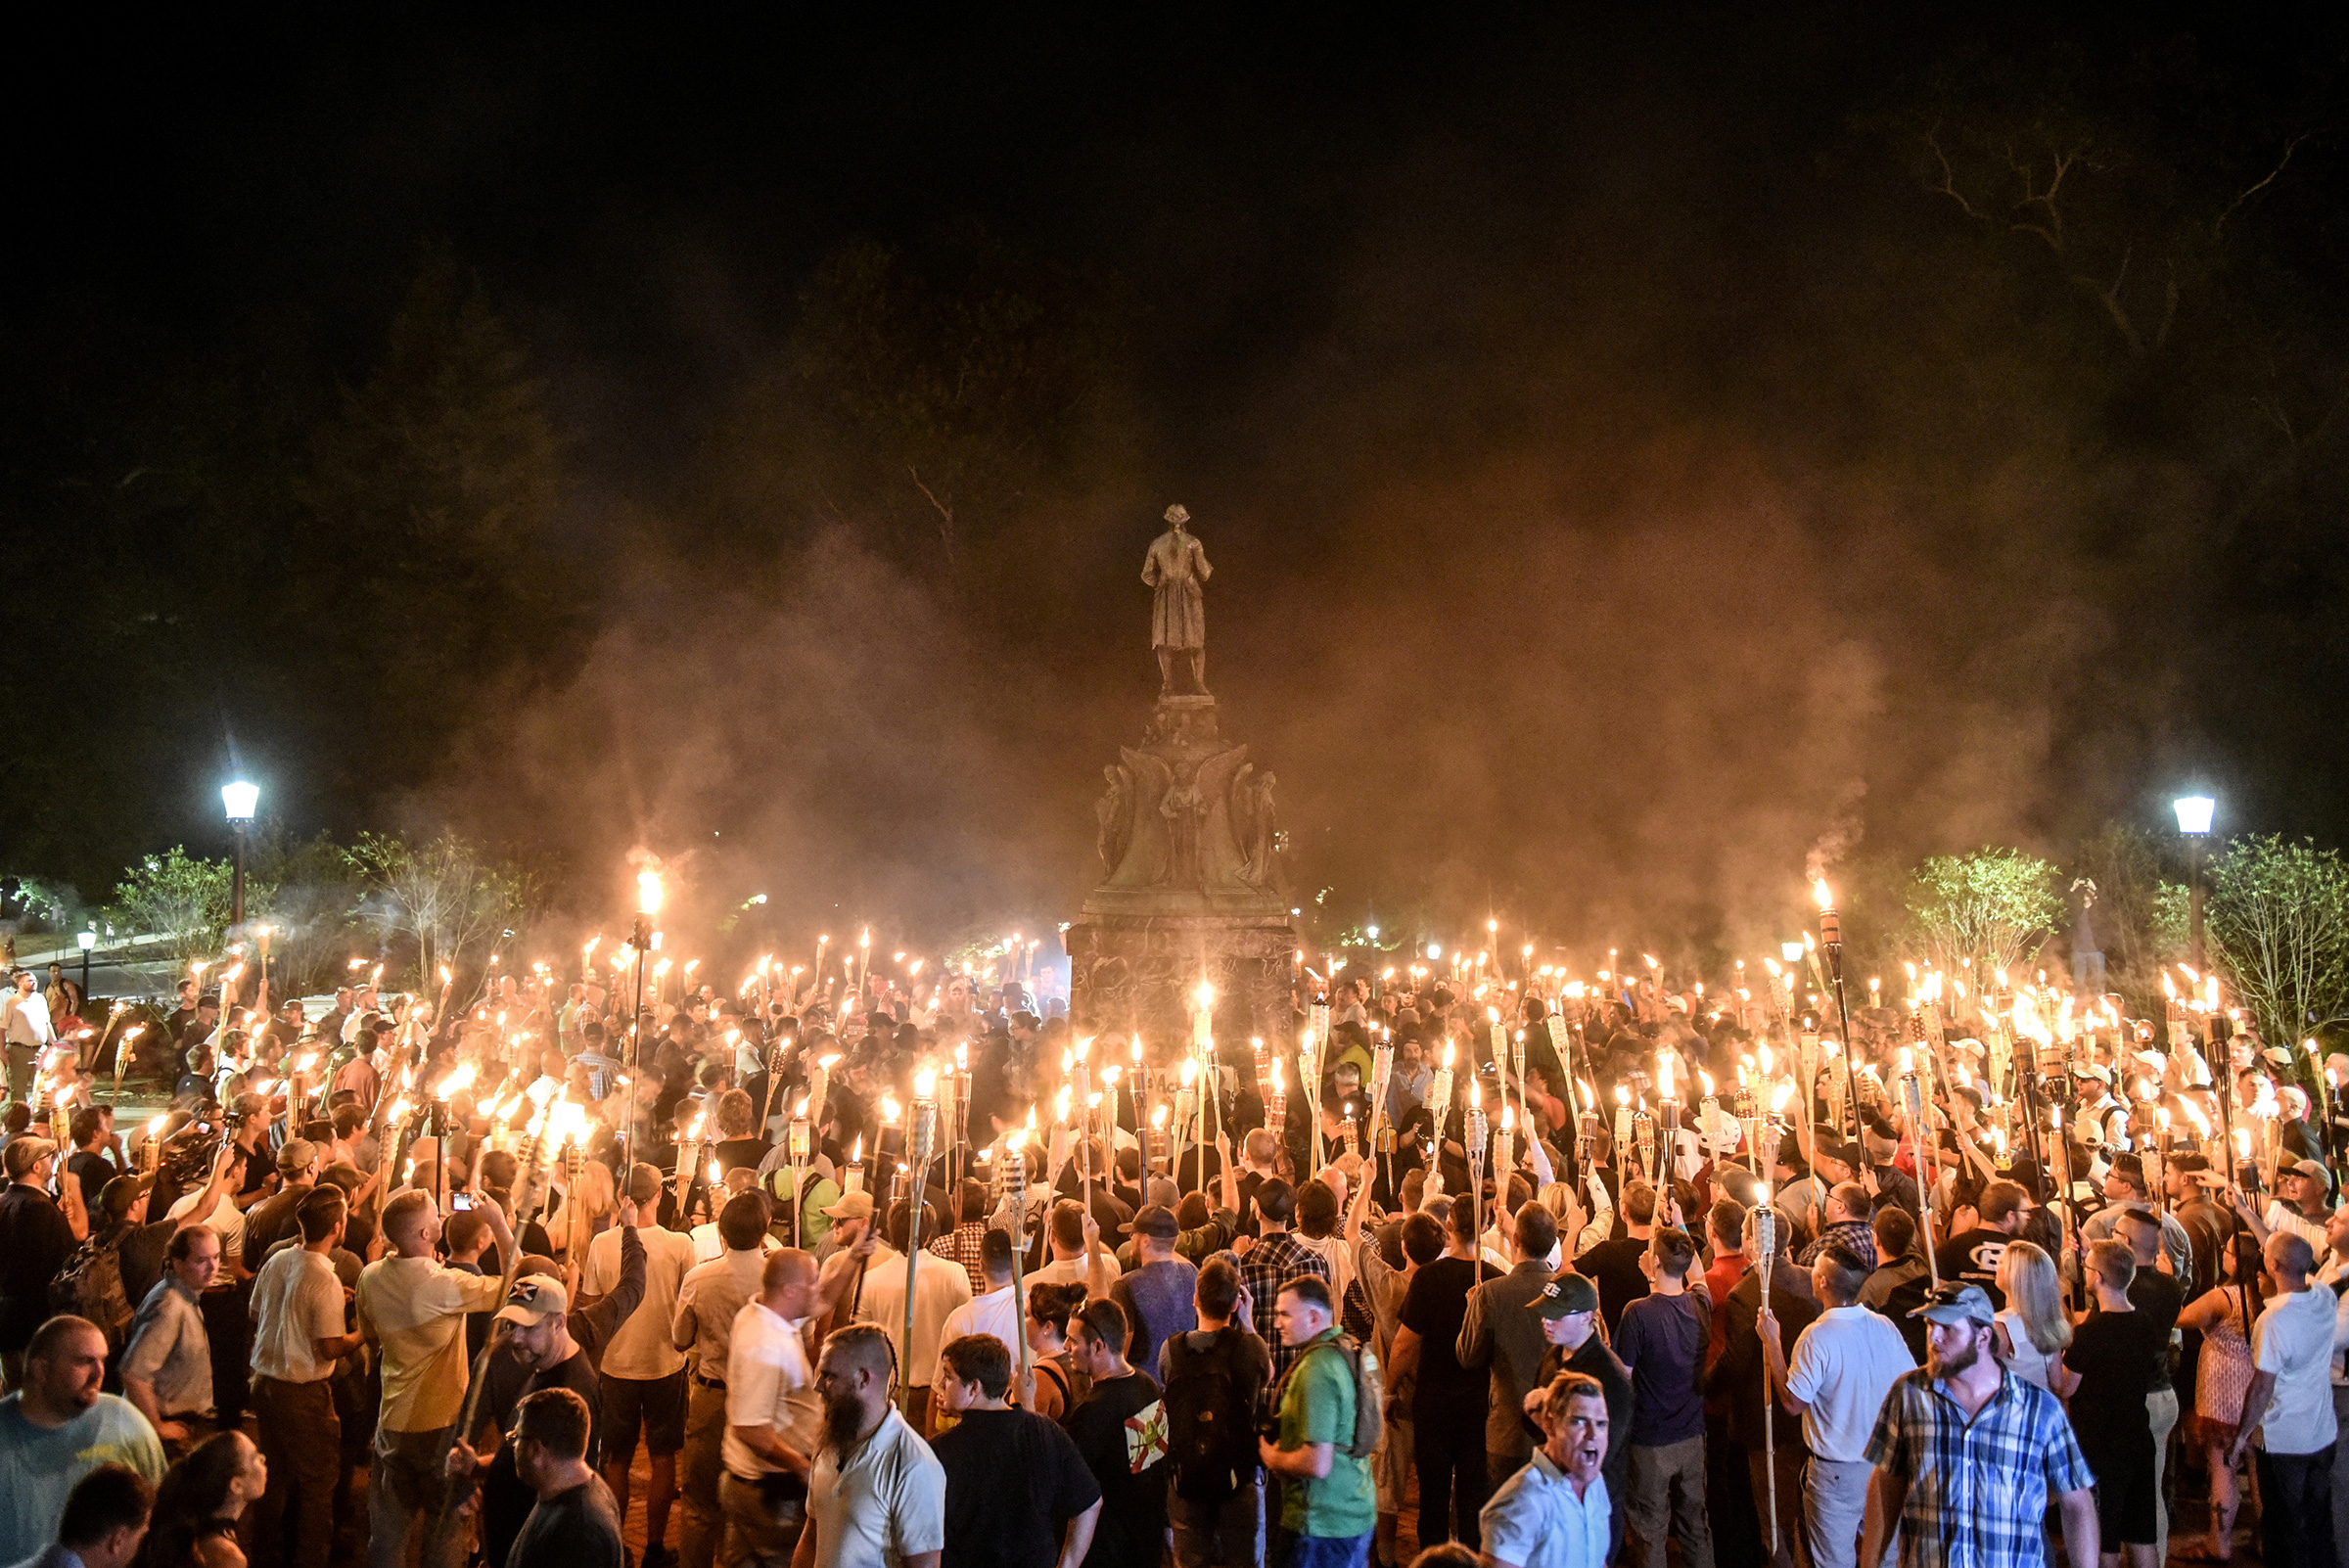 White nationalists participate in a torch-lit march on the grounds of the University of Virginia ahead of the Unite the Right Rally in Charlottesville, Virginia on Aug. 11, 2017 (Stephanie Keith—REUTERS)